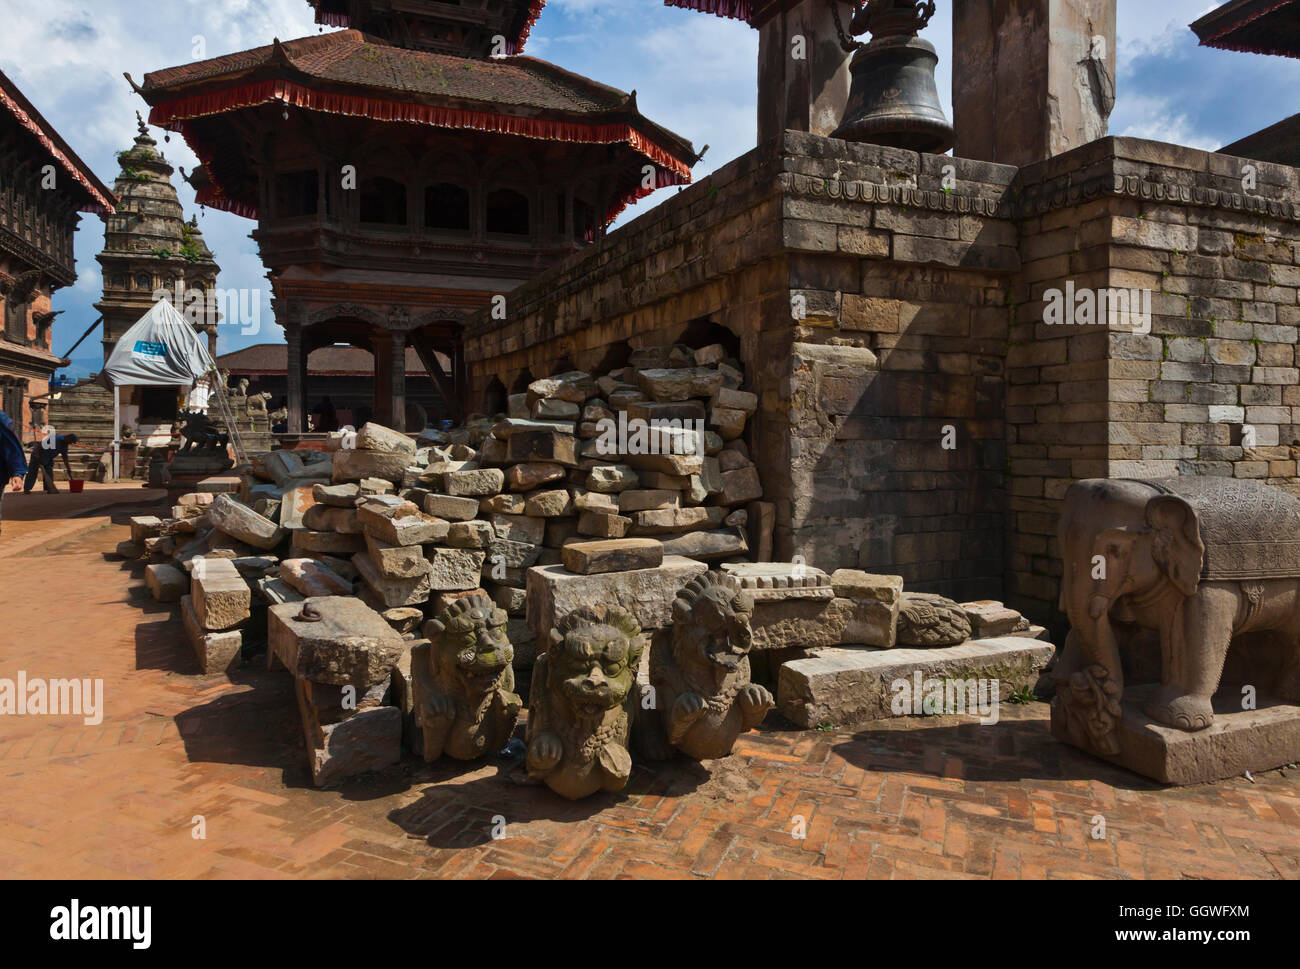 Villagers rebuild in the traditional town of BHAKTAPUR which was severely damaged by the 2015 earthquake - NEPAL Stock Photo